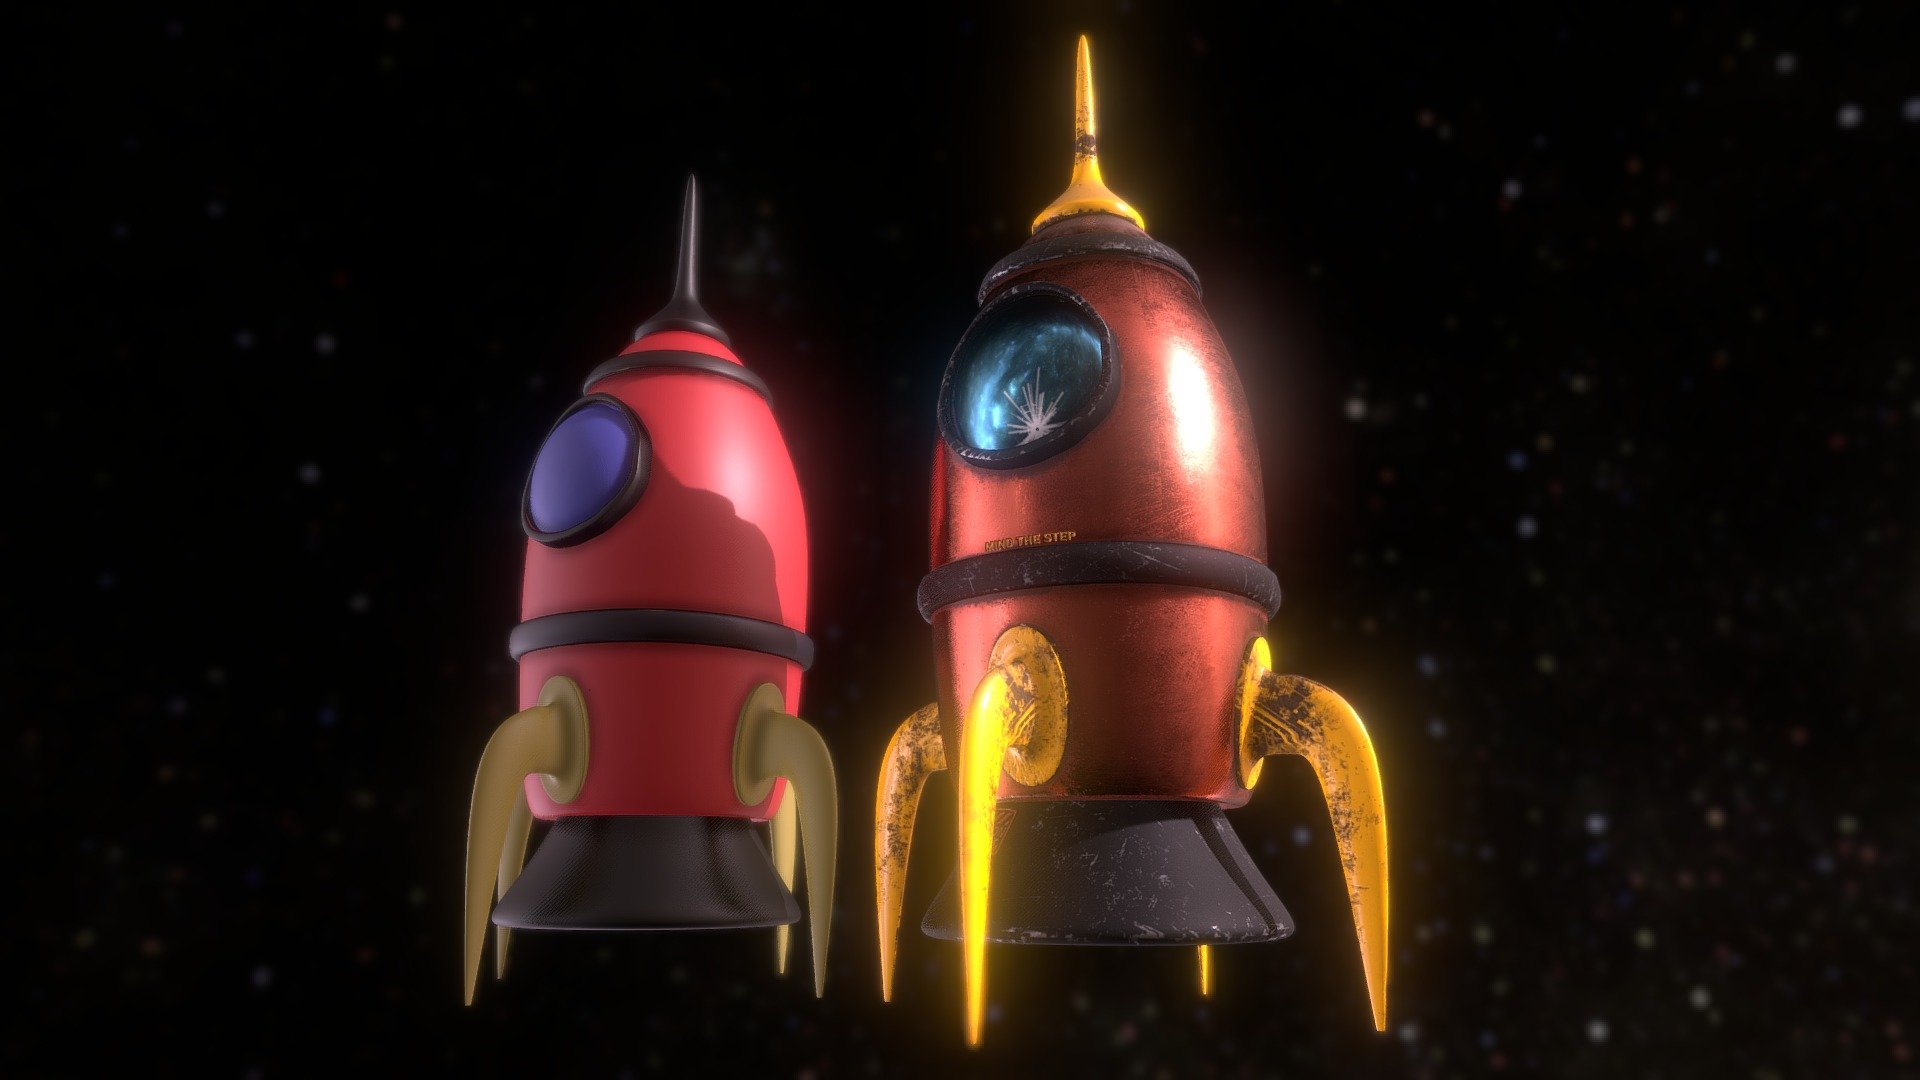 A quick cartoon rocket made in Blender based on a tutorial by Grant Abbitt
I decided to give Substance Painter a try, after a bit of messing around I was quite please with the end result 3d model